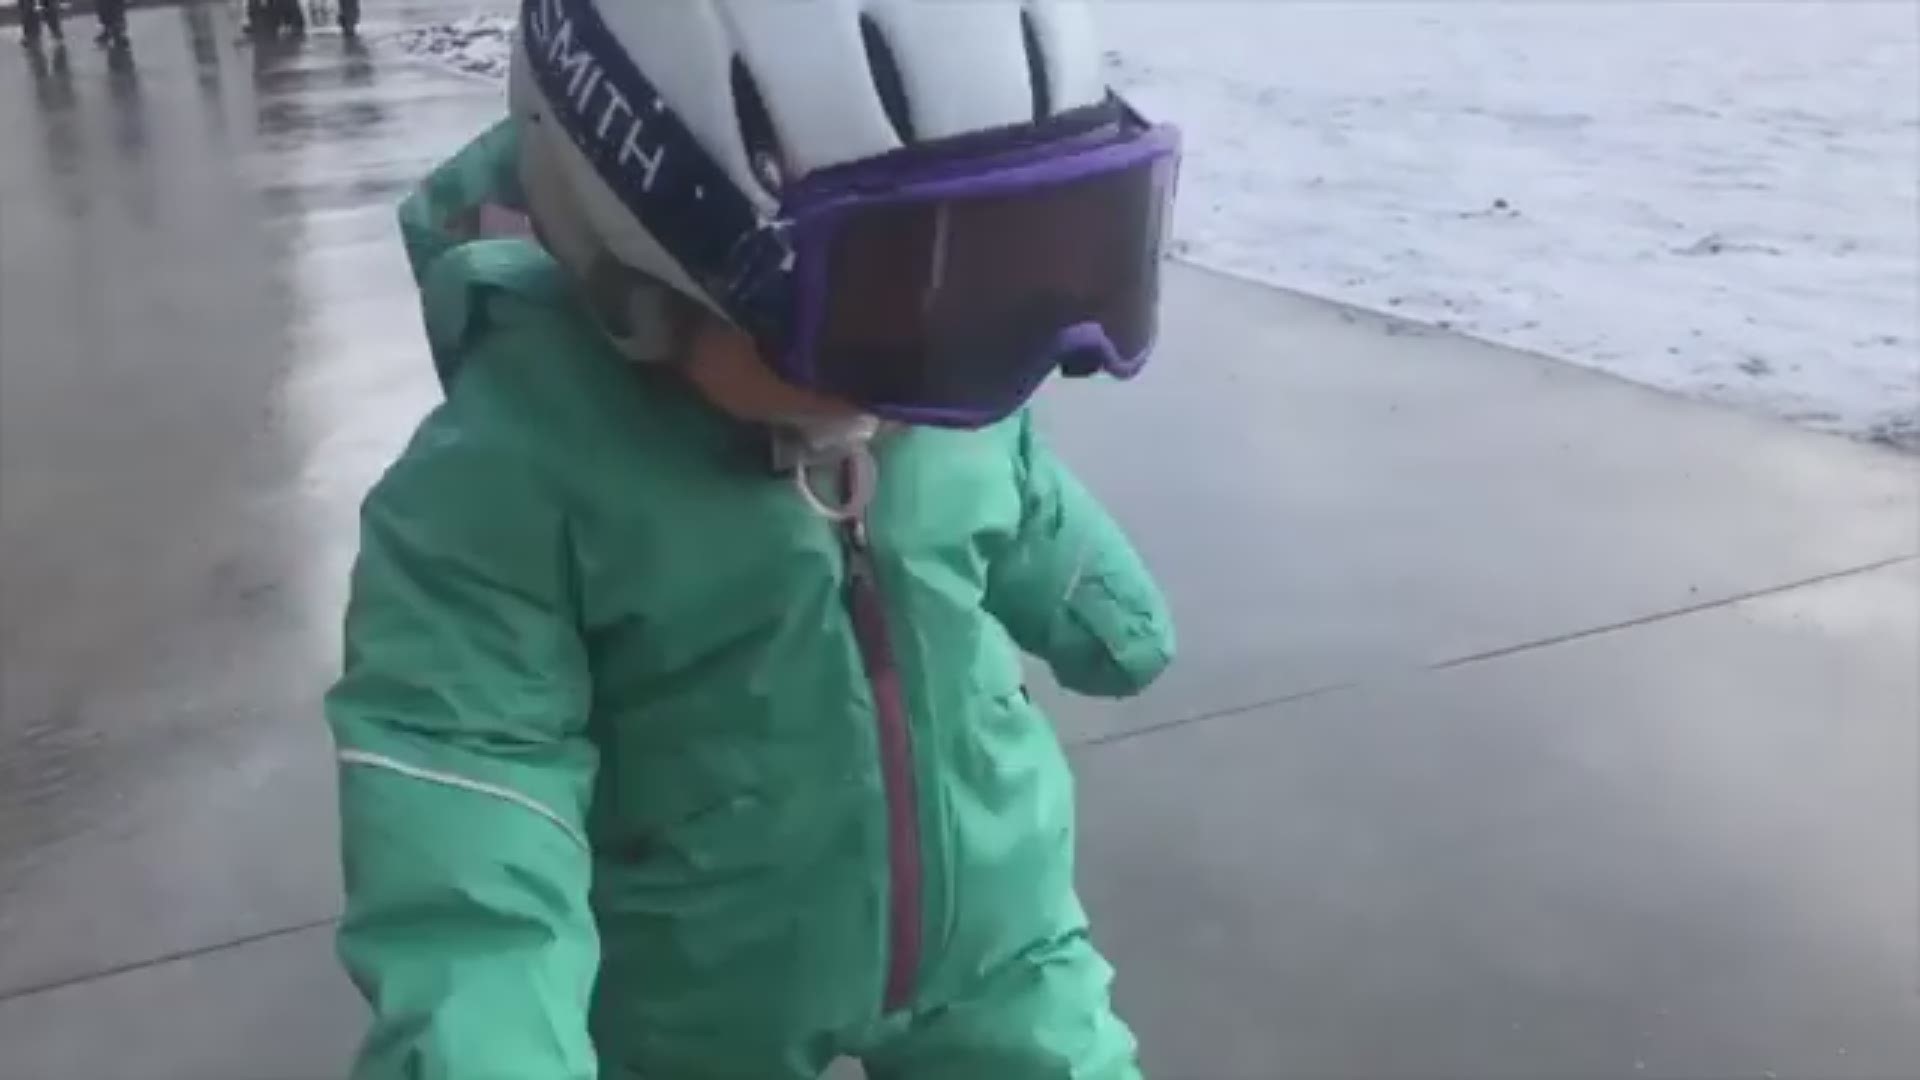 1-year-old Maeve is already an expert snowboarder.